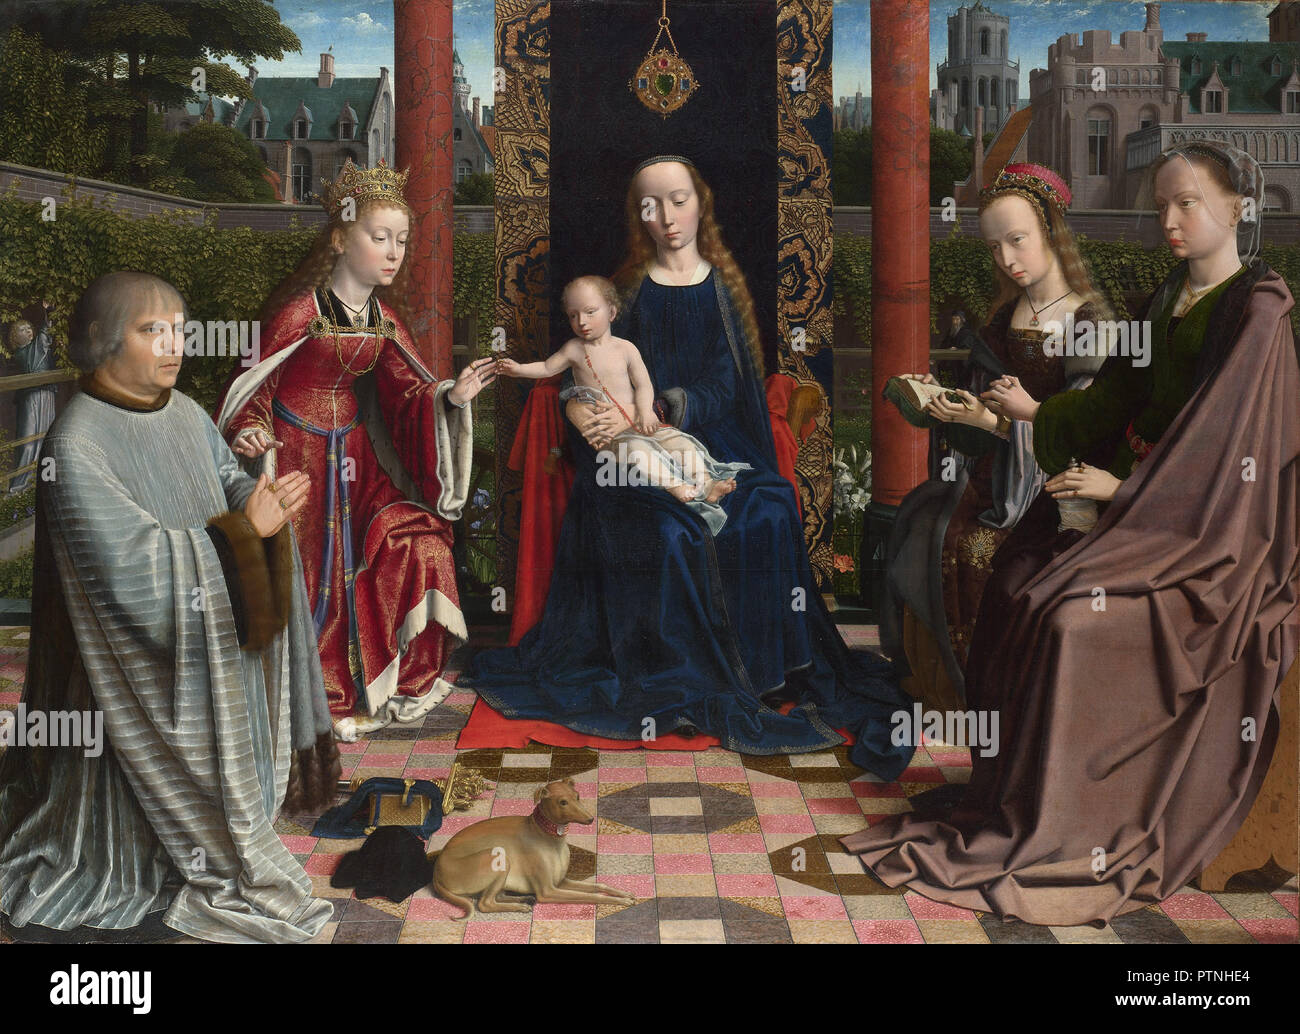 The Virgin and Child with Saints and Donor. Date/Period: Probably 1510. Painting. Oil on oak. Height: 105.8 cm (41.6 in); Width: 144.4 cm (56.8 in). Author: Gerard David. DAVID, GERARD. Stock Photo